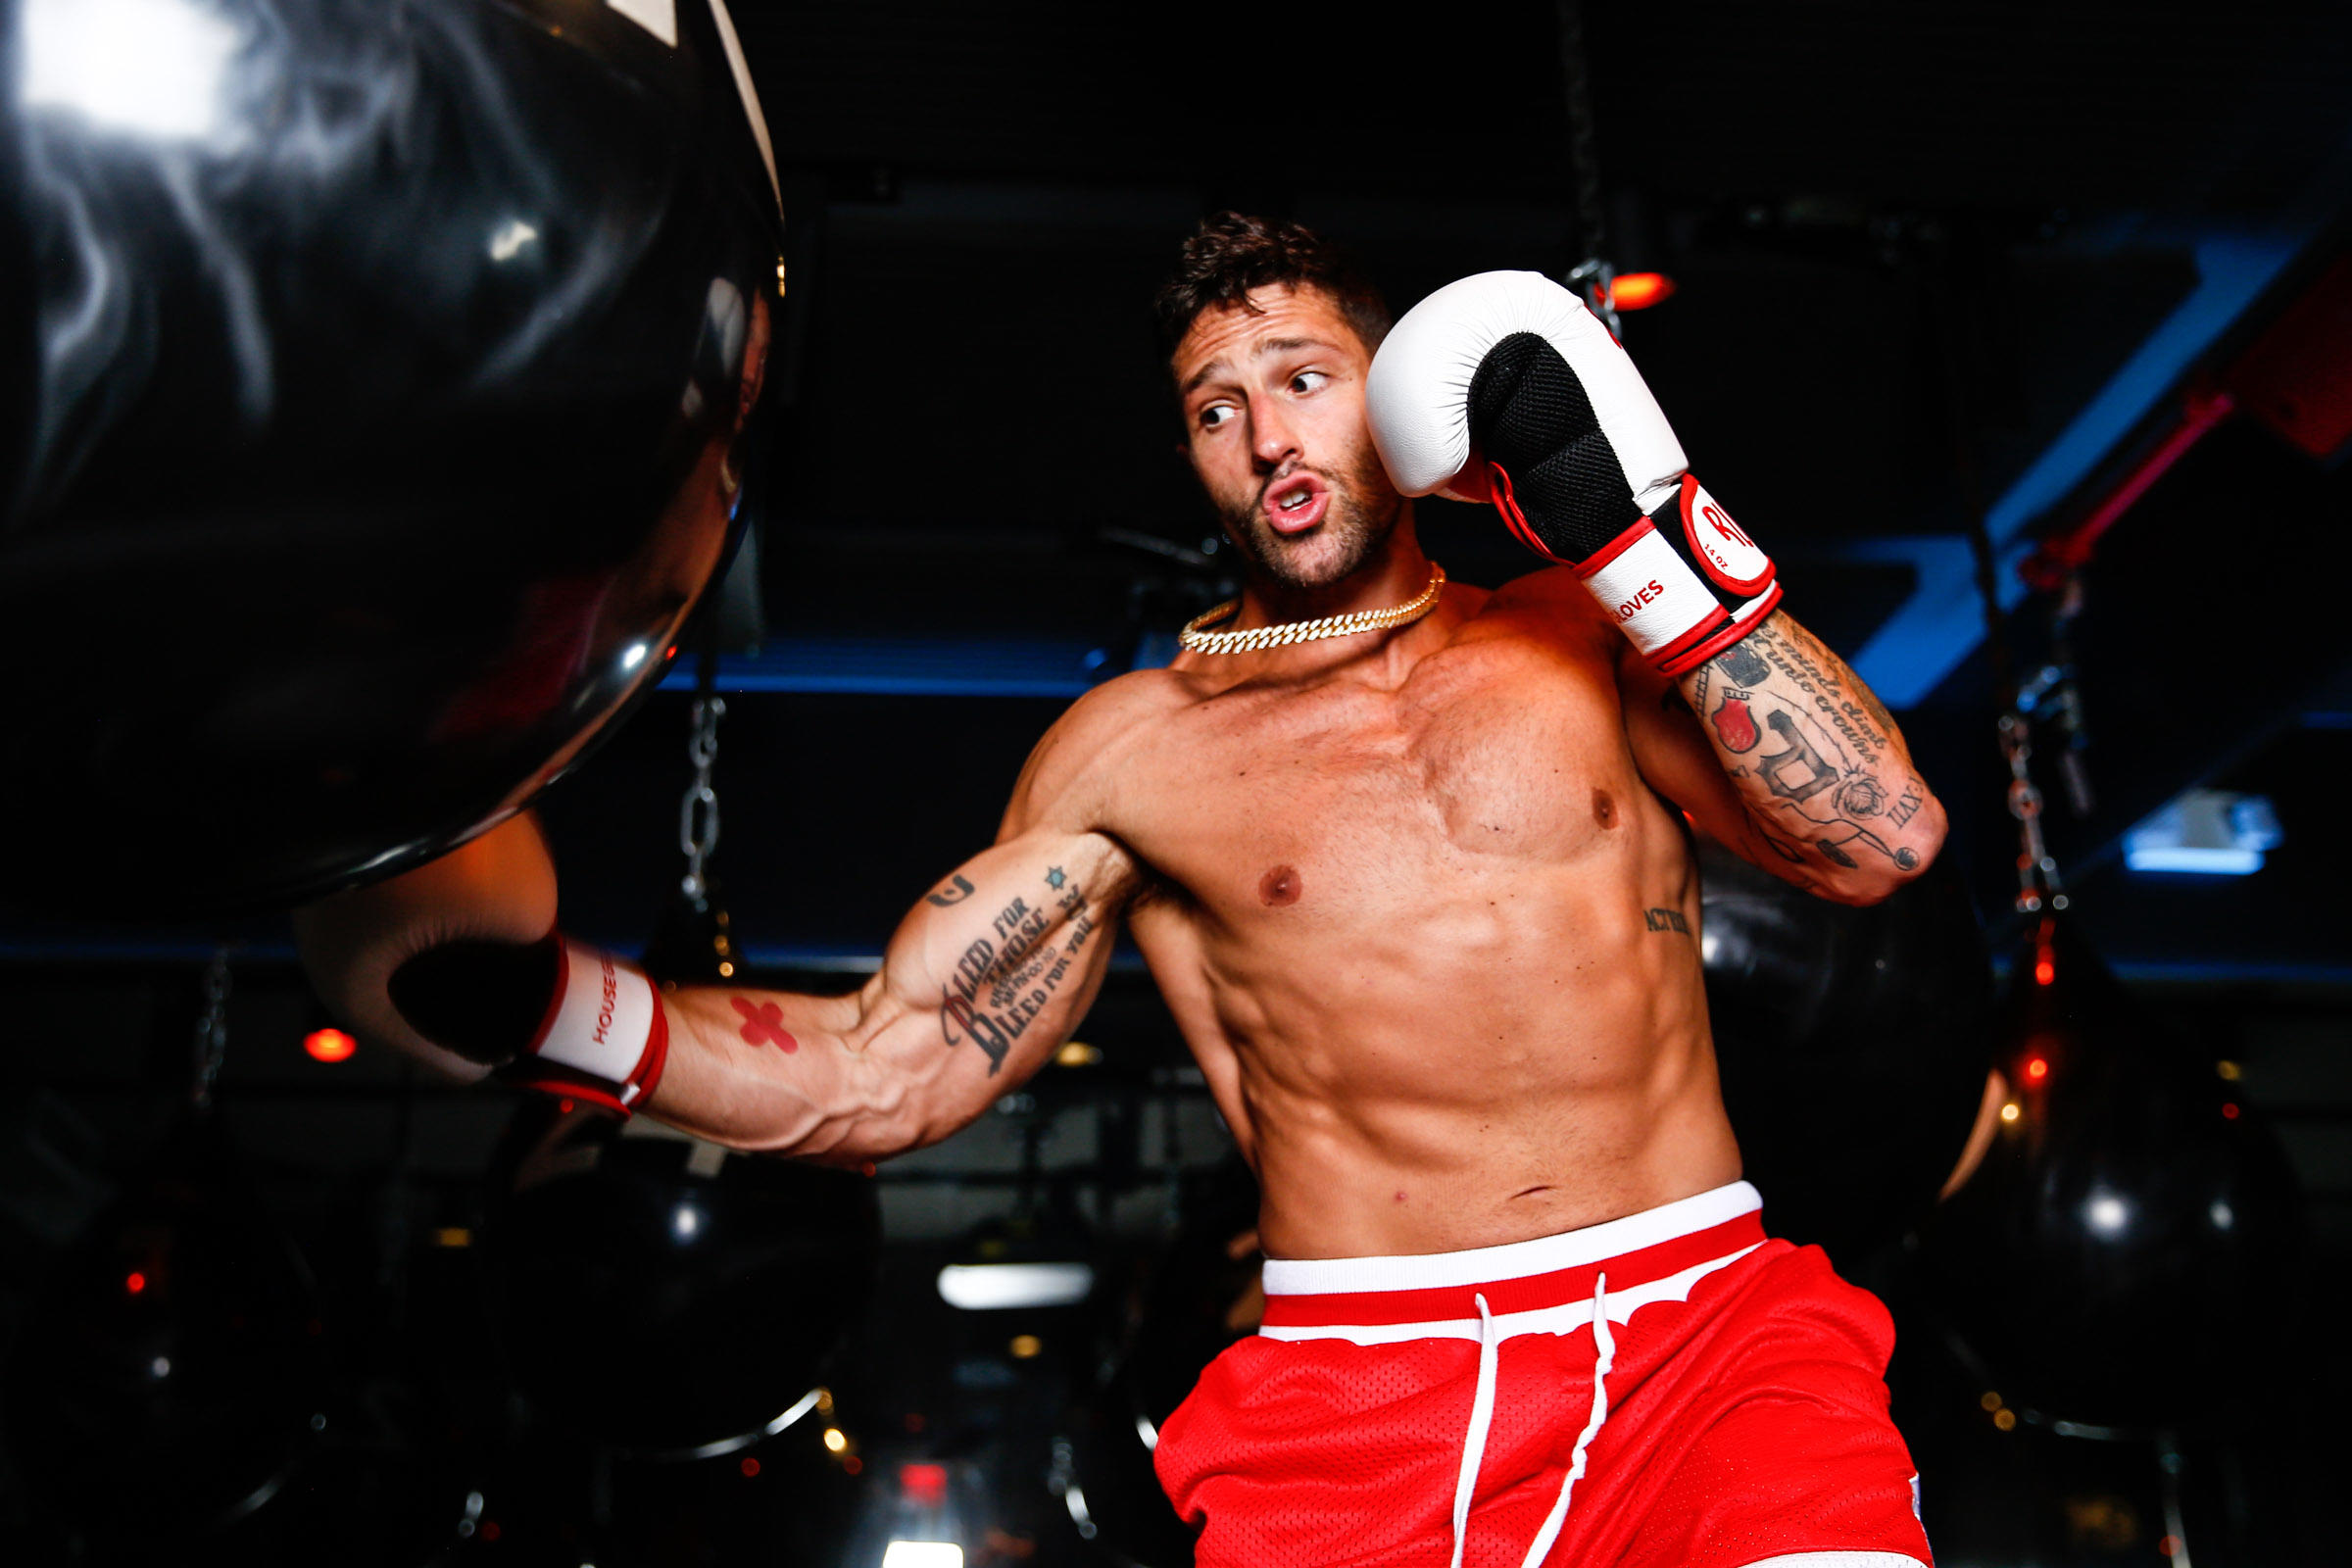 Boxing, HIIT, METCON, and strength training - your full - body workout destination is at Rumble Boxing Tempe in AZ.